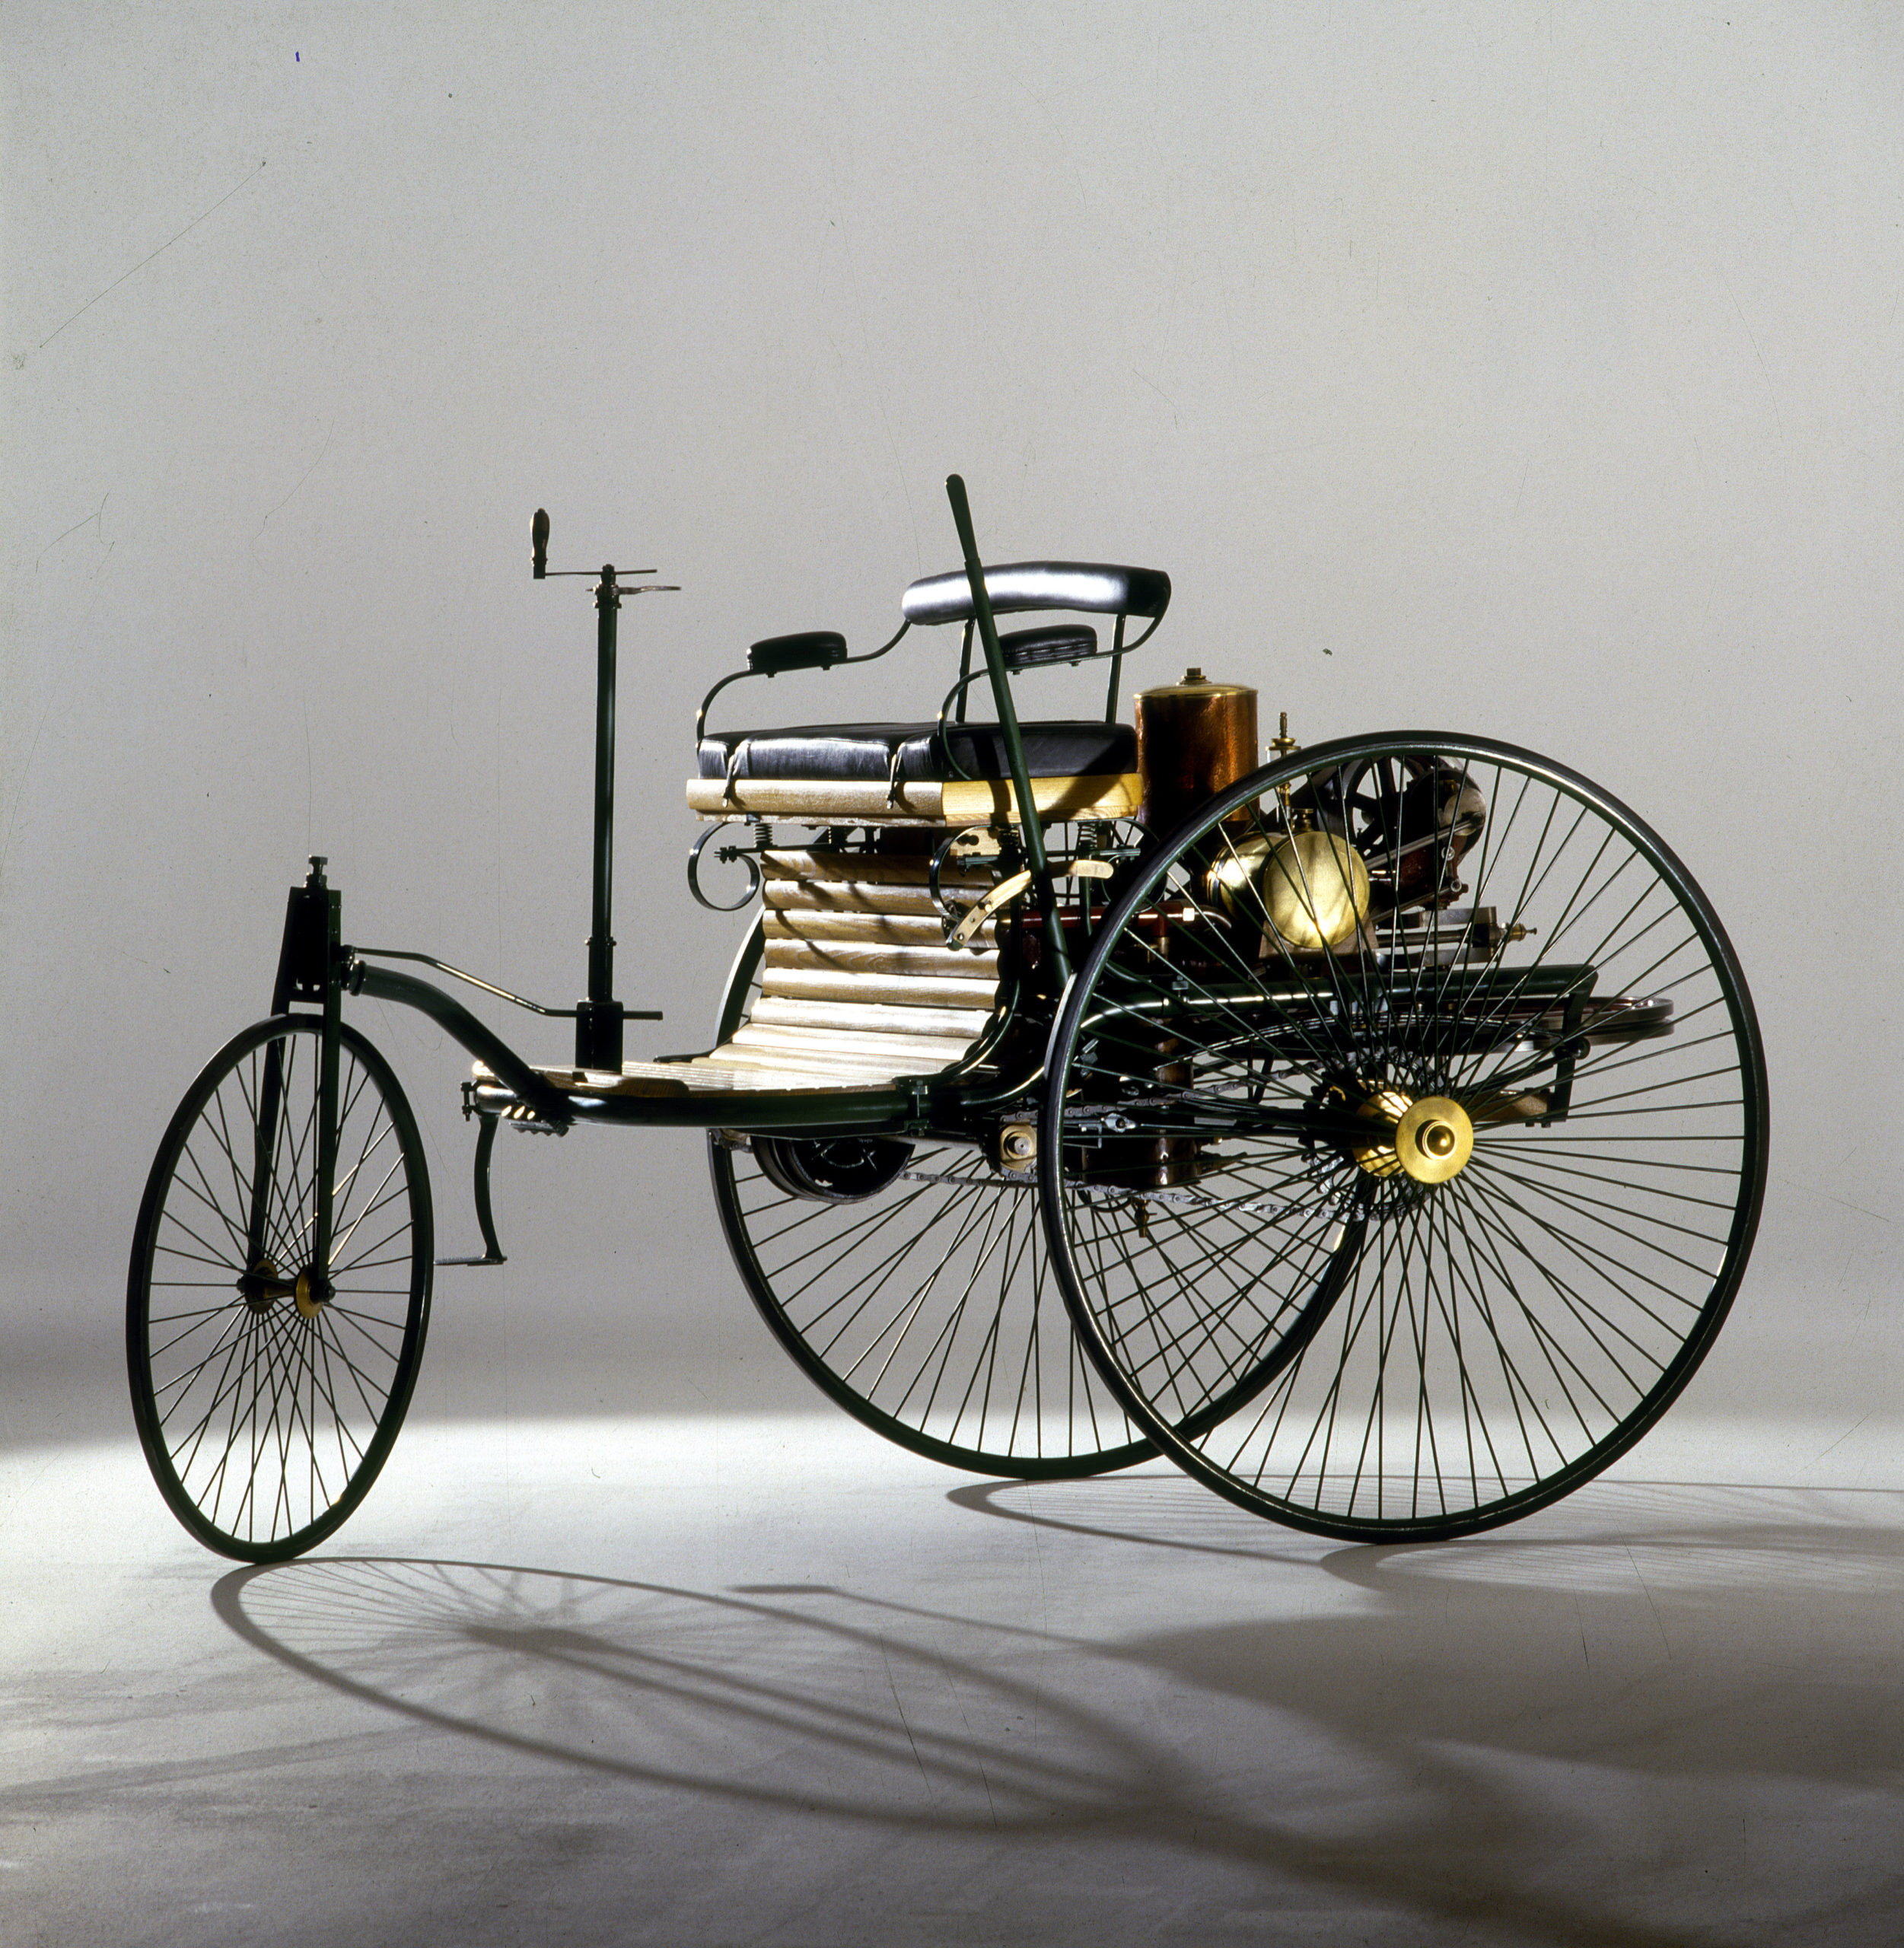 Live Out Your Hipster Dreams With This Replica Of The First Mercedes-Benz Ever Made